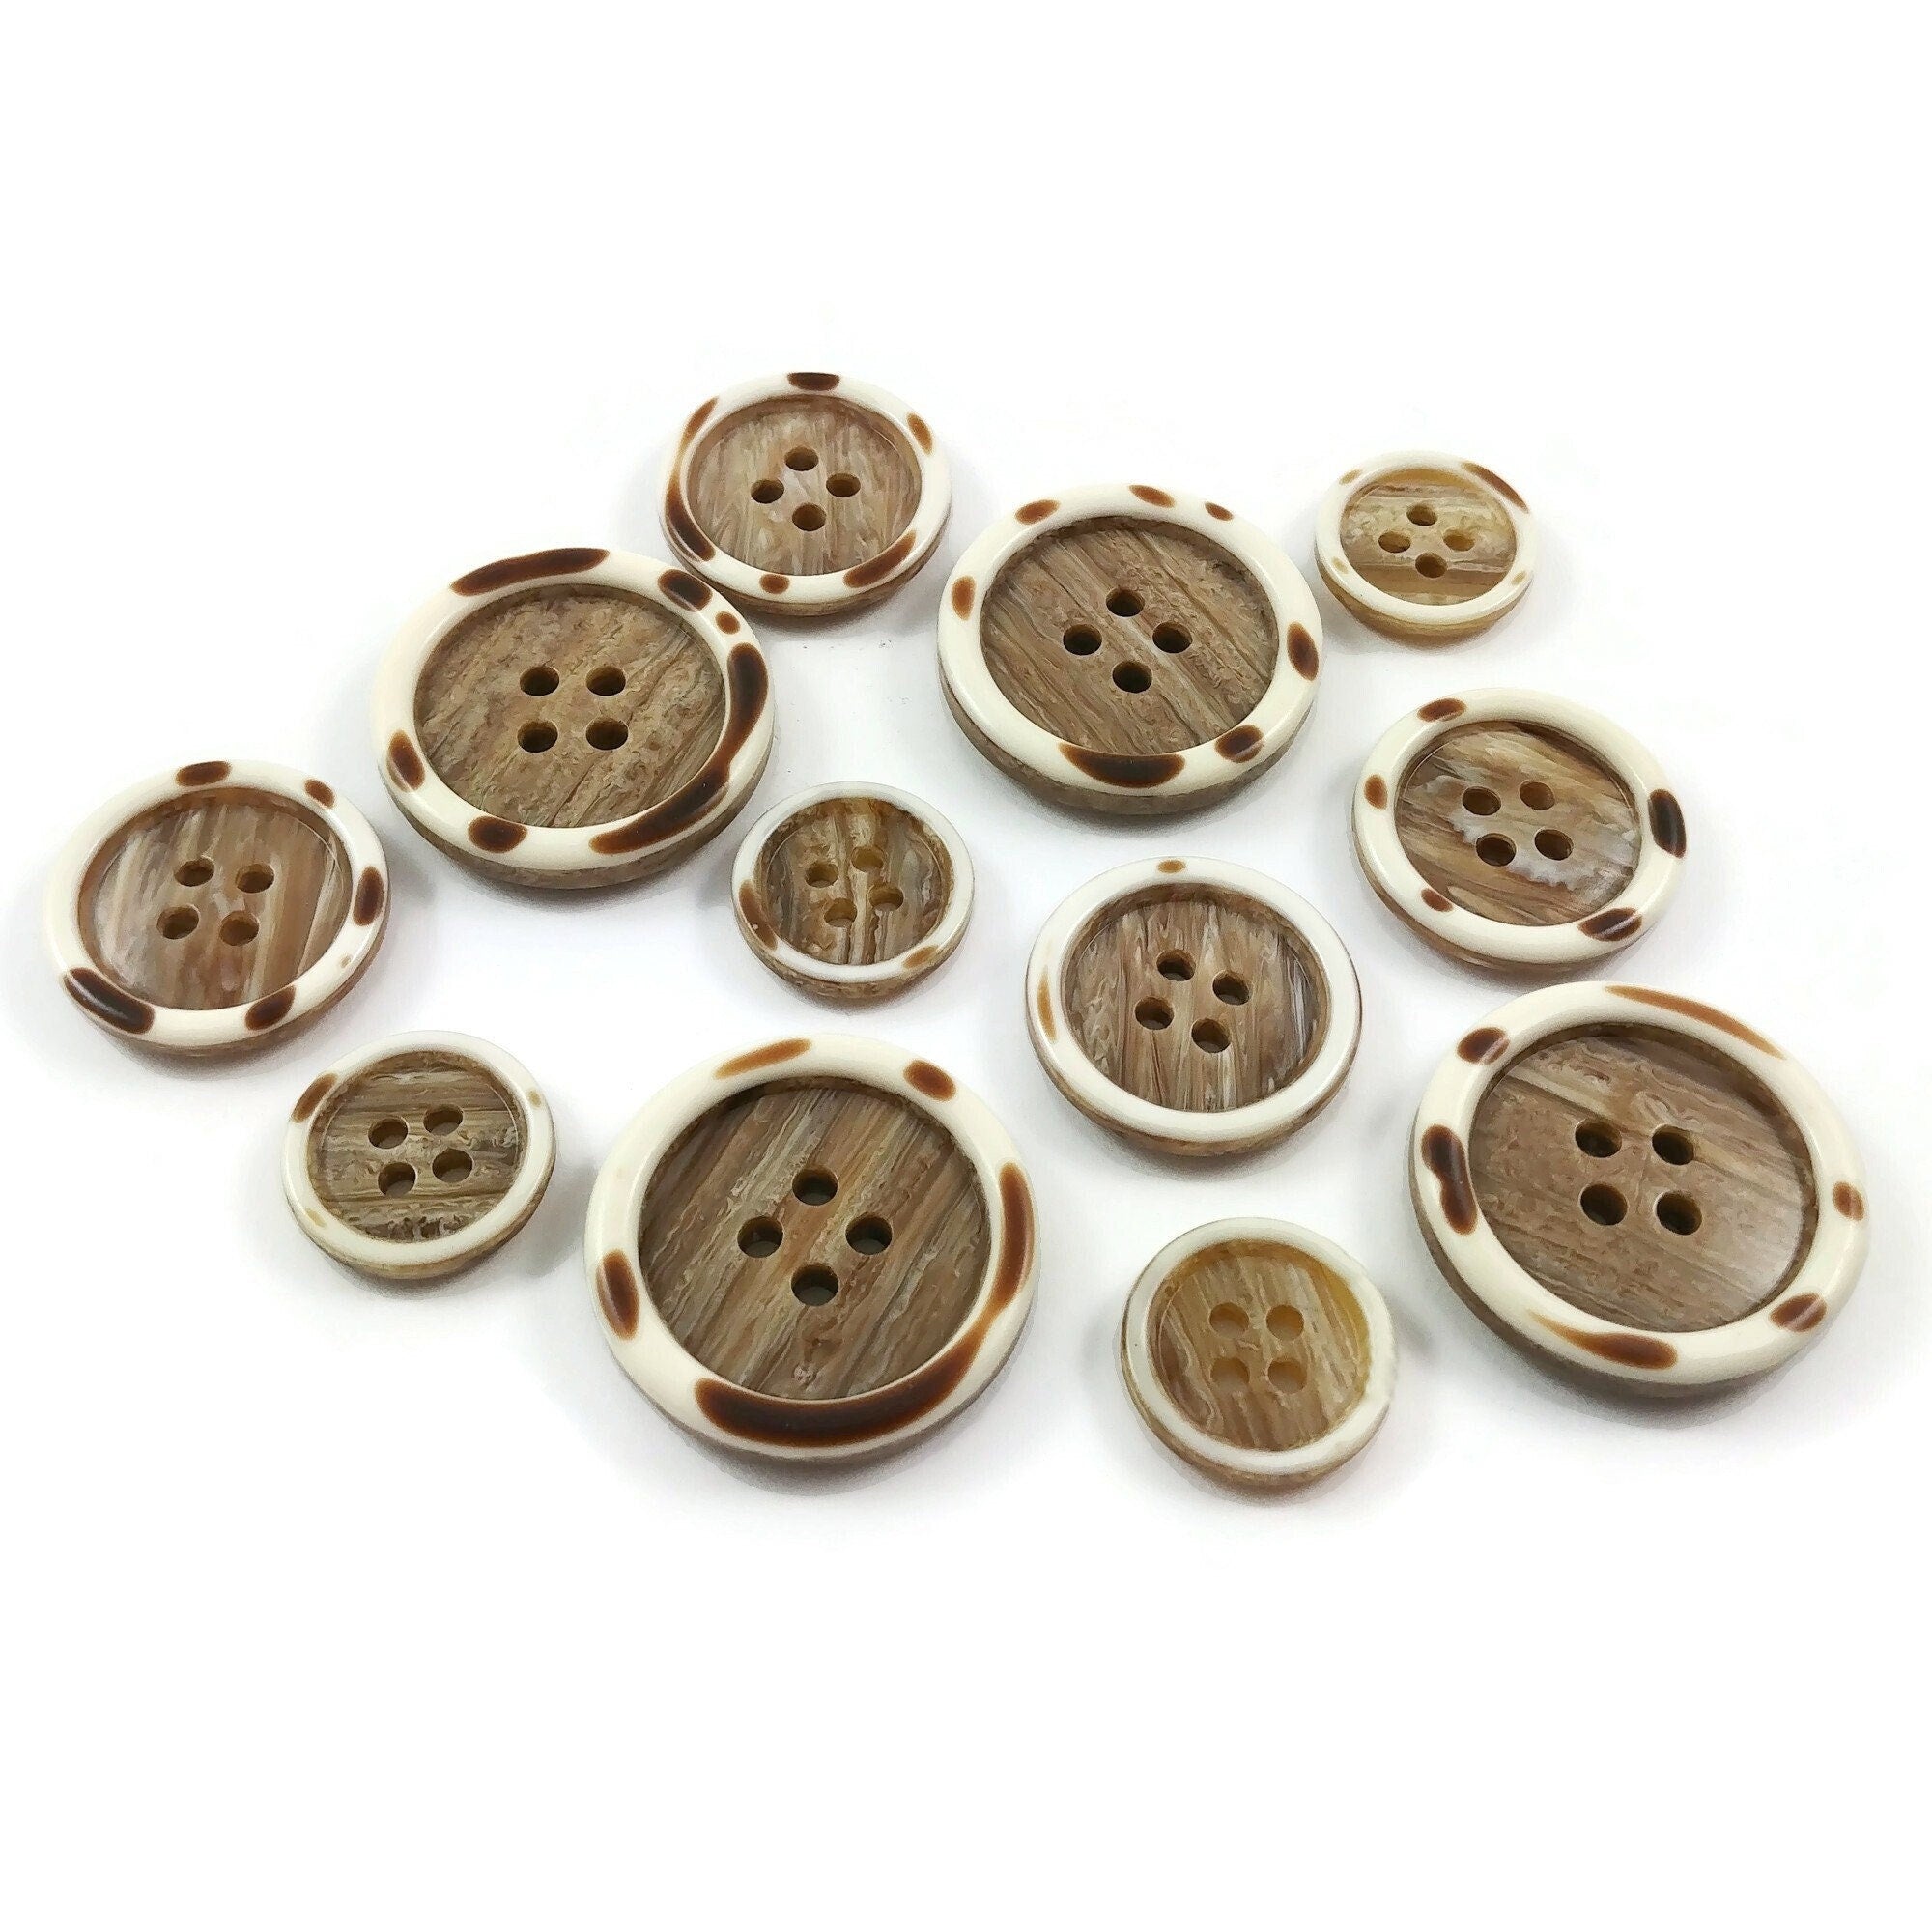 4 beige resin sewing buttons - Pick your size: 15mm, 20mm, or 25mm